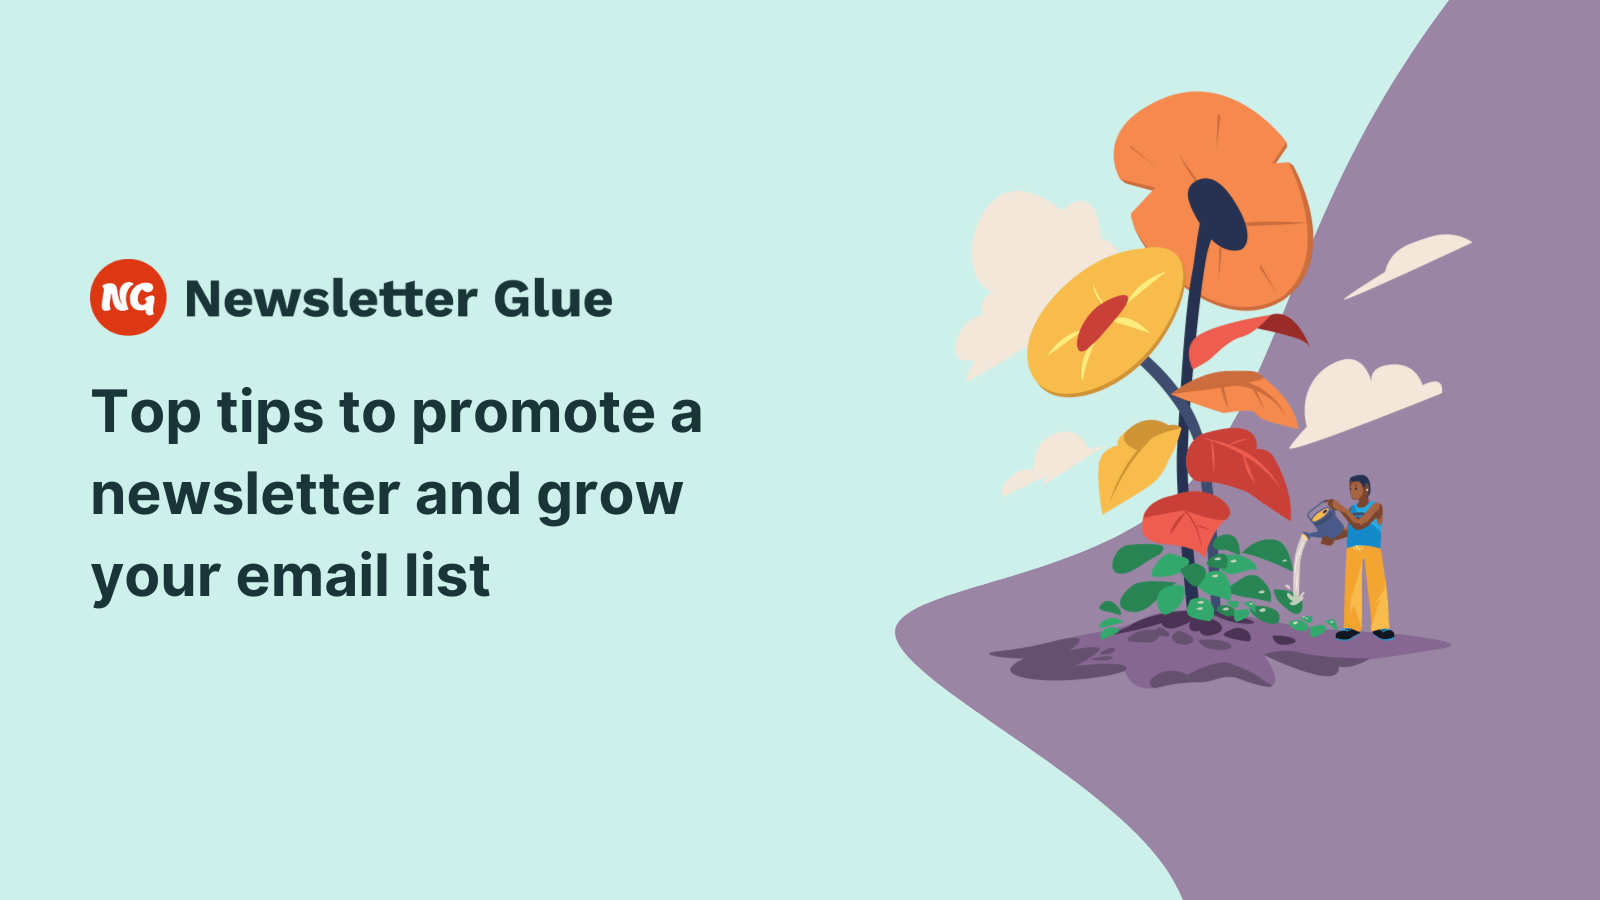 Top tips to promote a newsletter and grow your email list